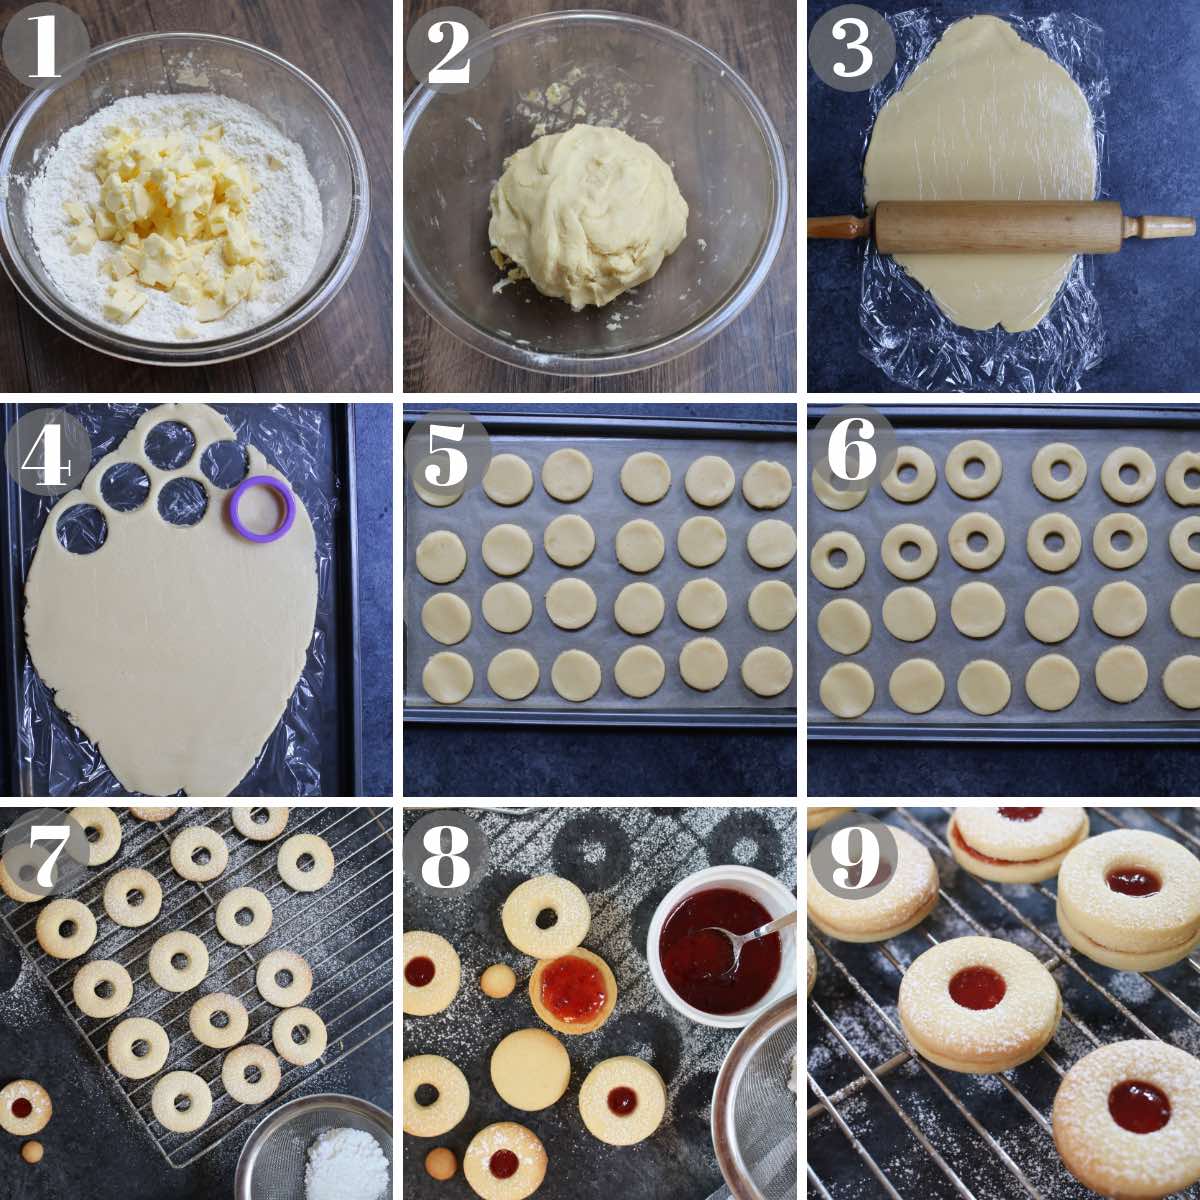 Step by step photo collage with 9 images showing how to make jammie dodger: from making the dough to assemble the cookie sandwiches.